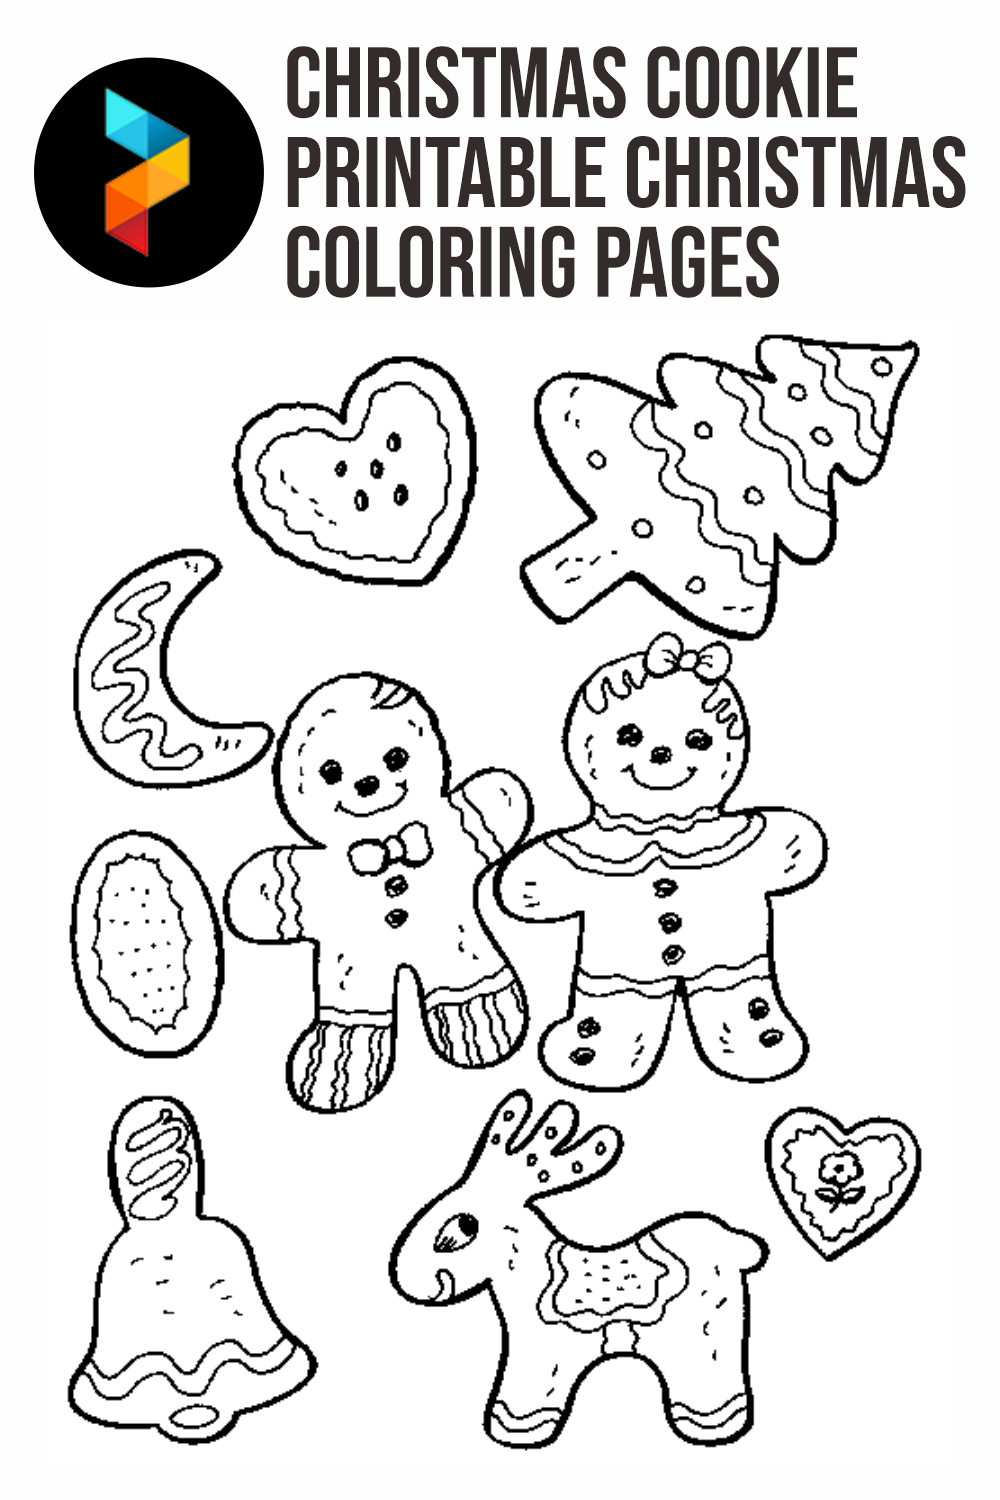 Christmas Cookie Printable Christmas Coloring Pages